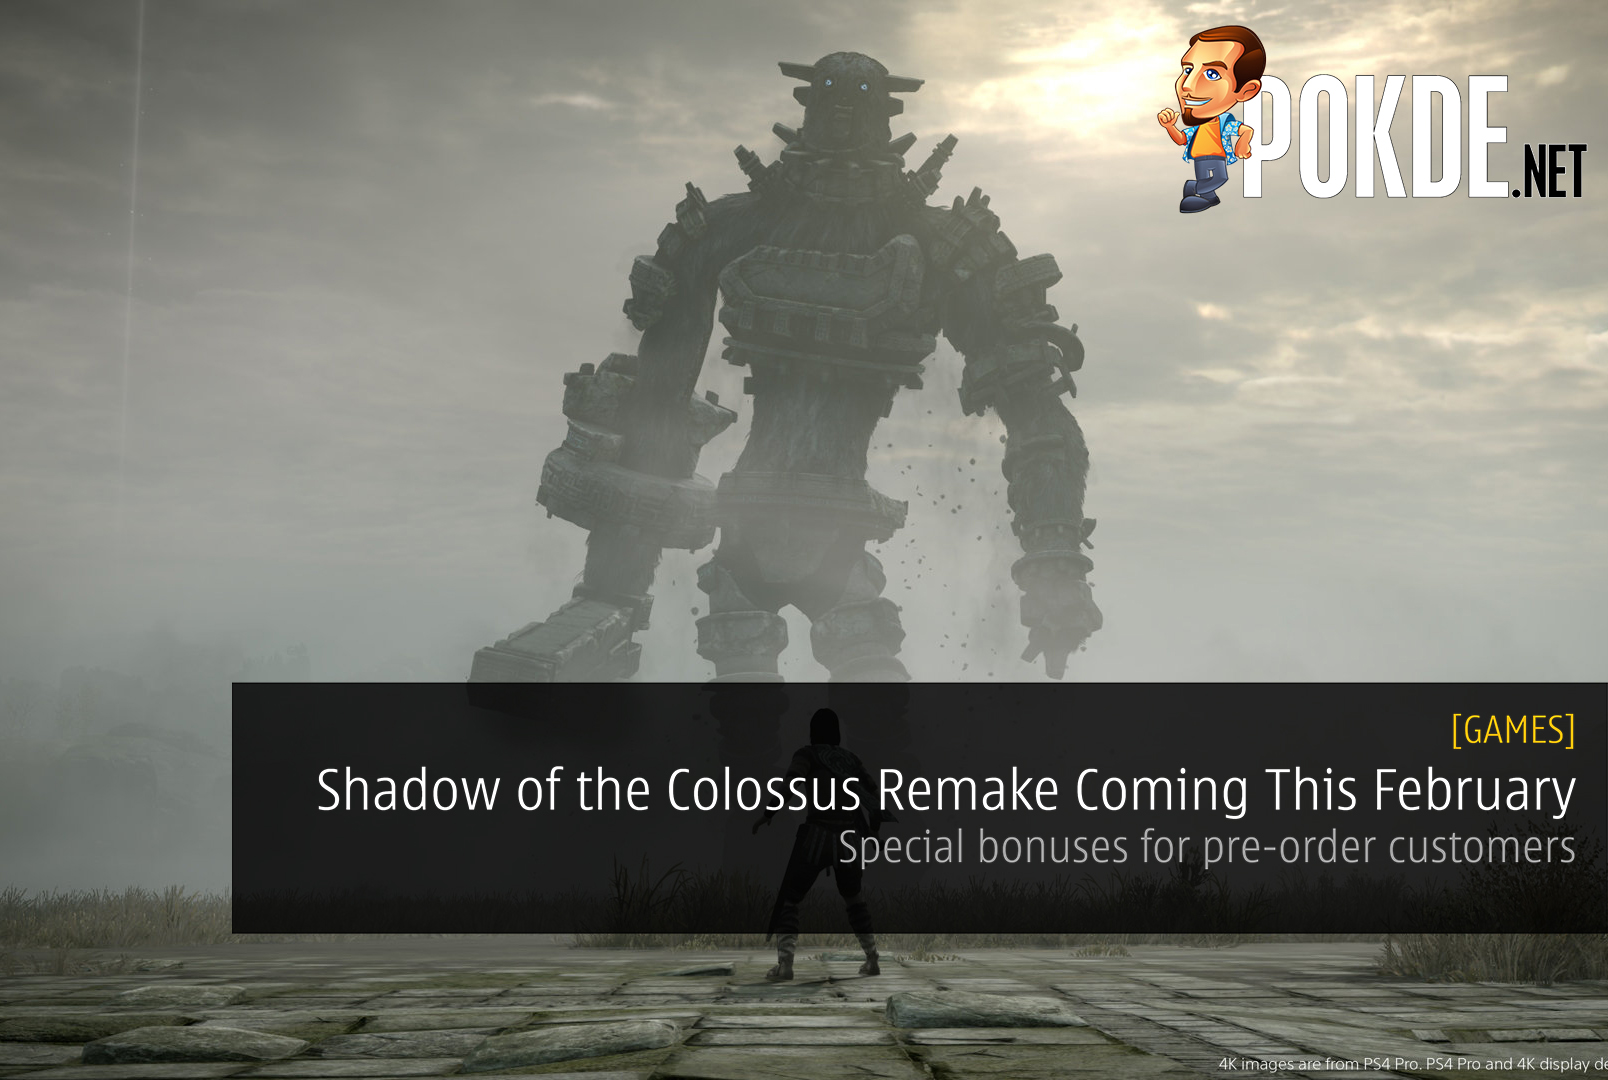 Shadow of the Colossus Remake Coming To The PS4 This February - Special bonuses for pre-order customers 40